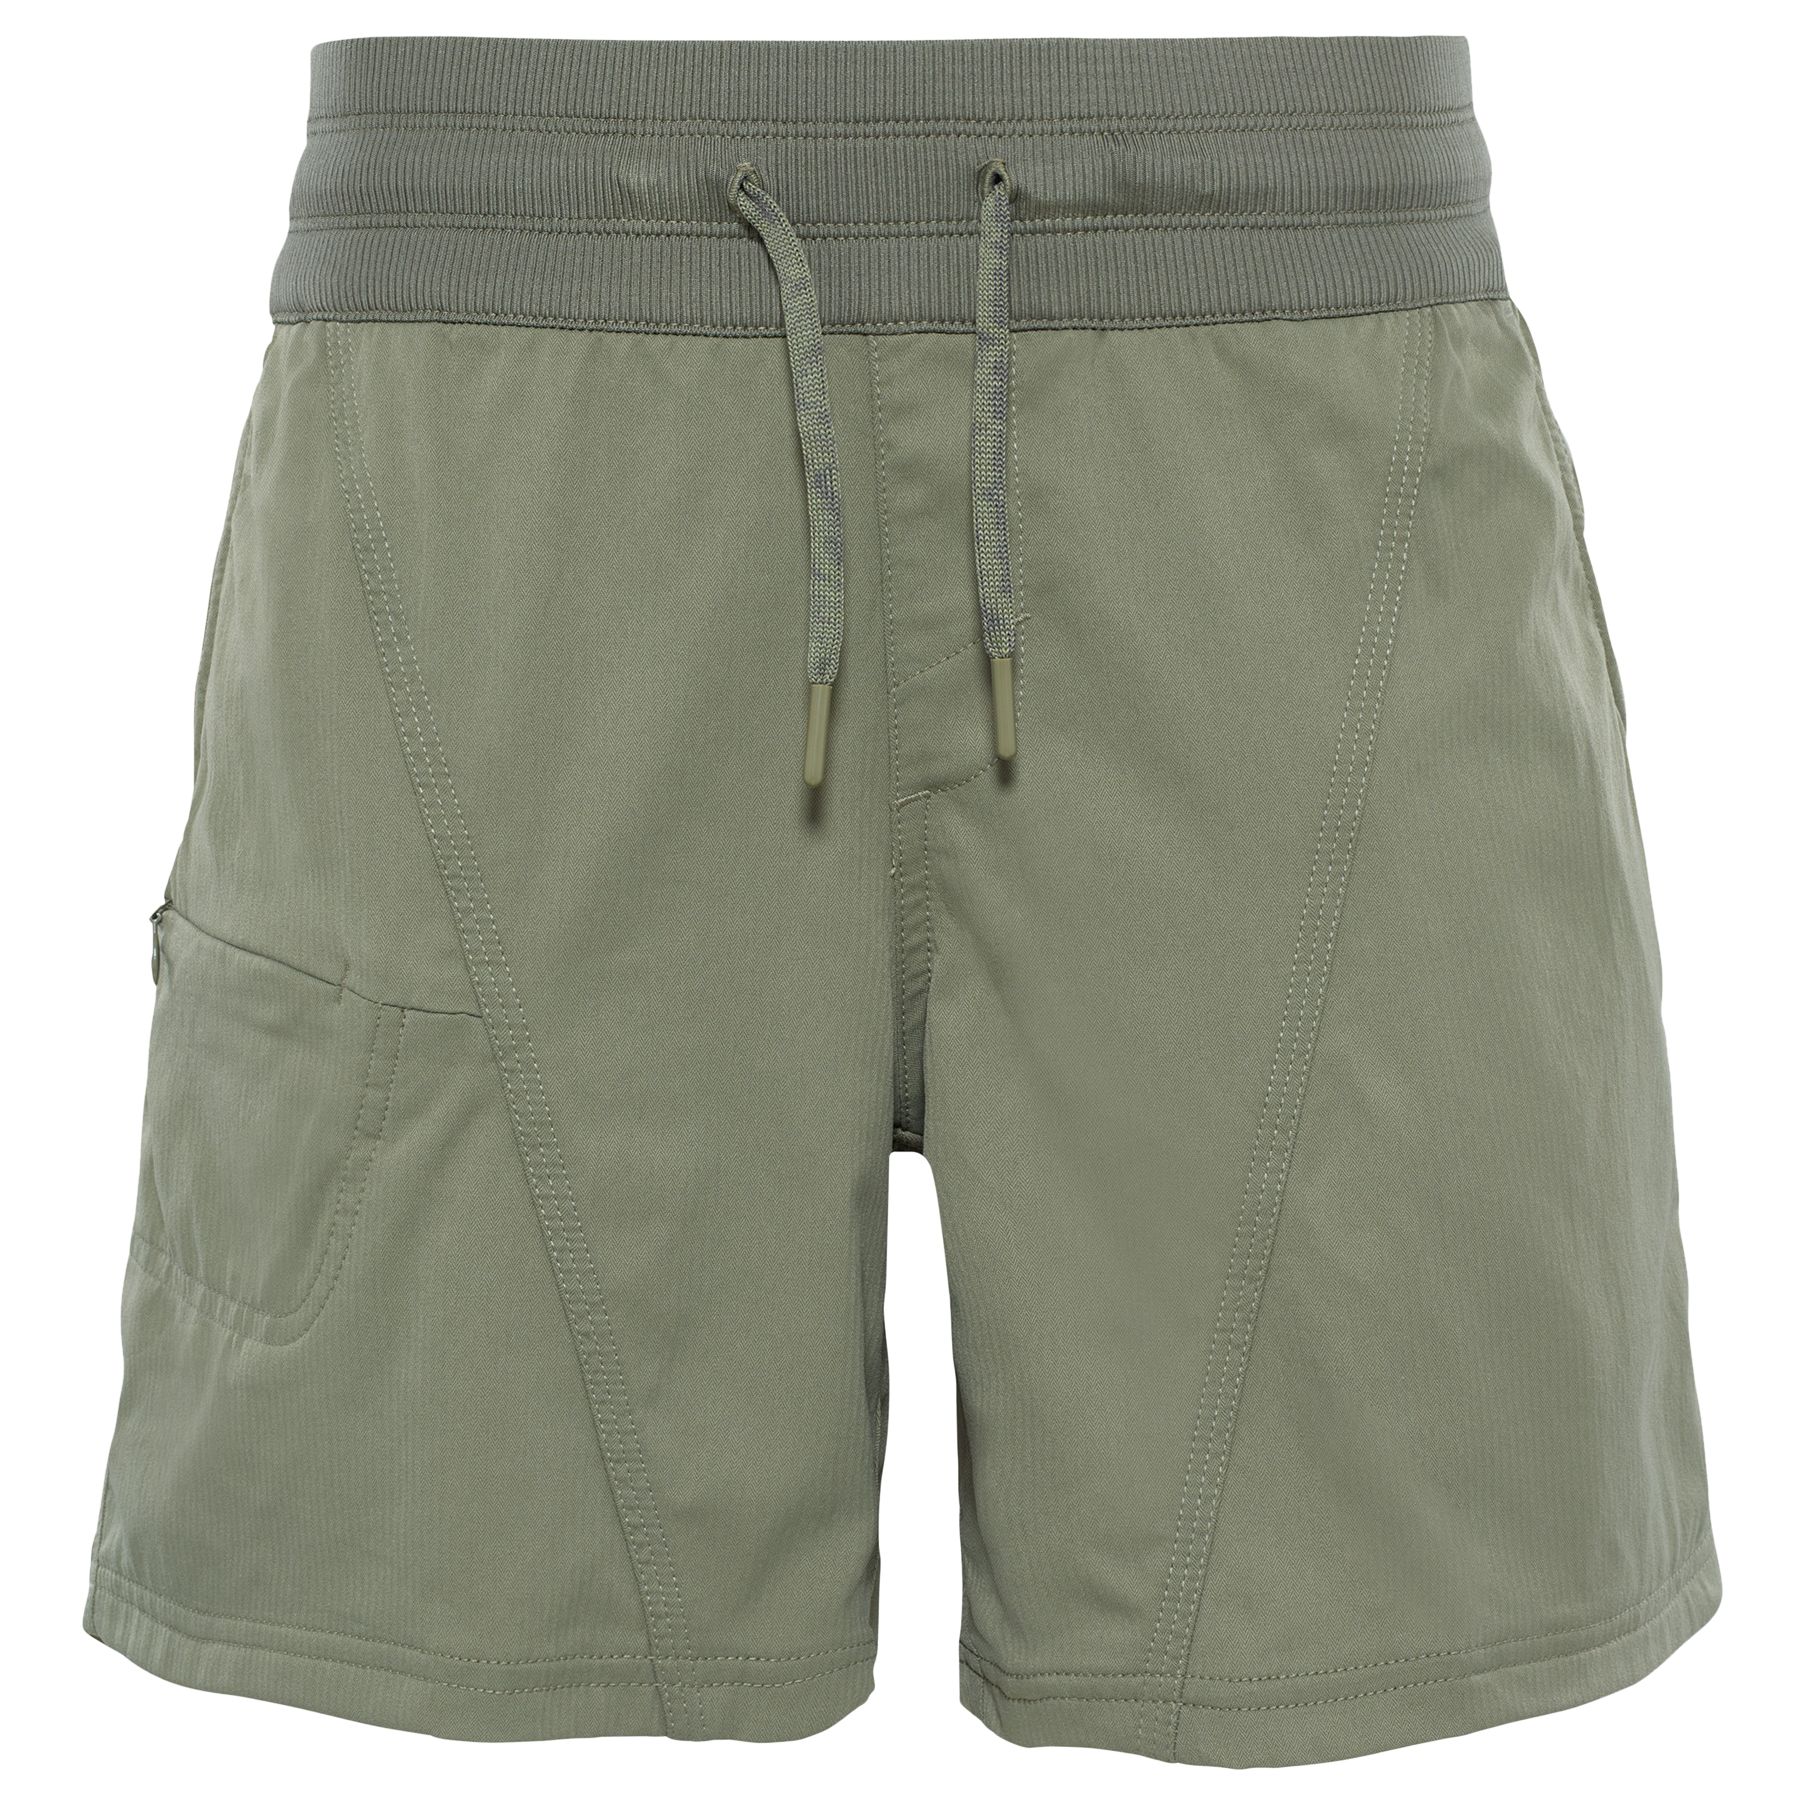 The North Face Reactor Aphrodite Shorts, Green, L